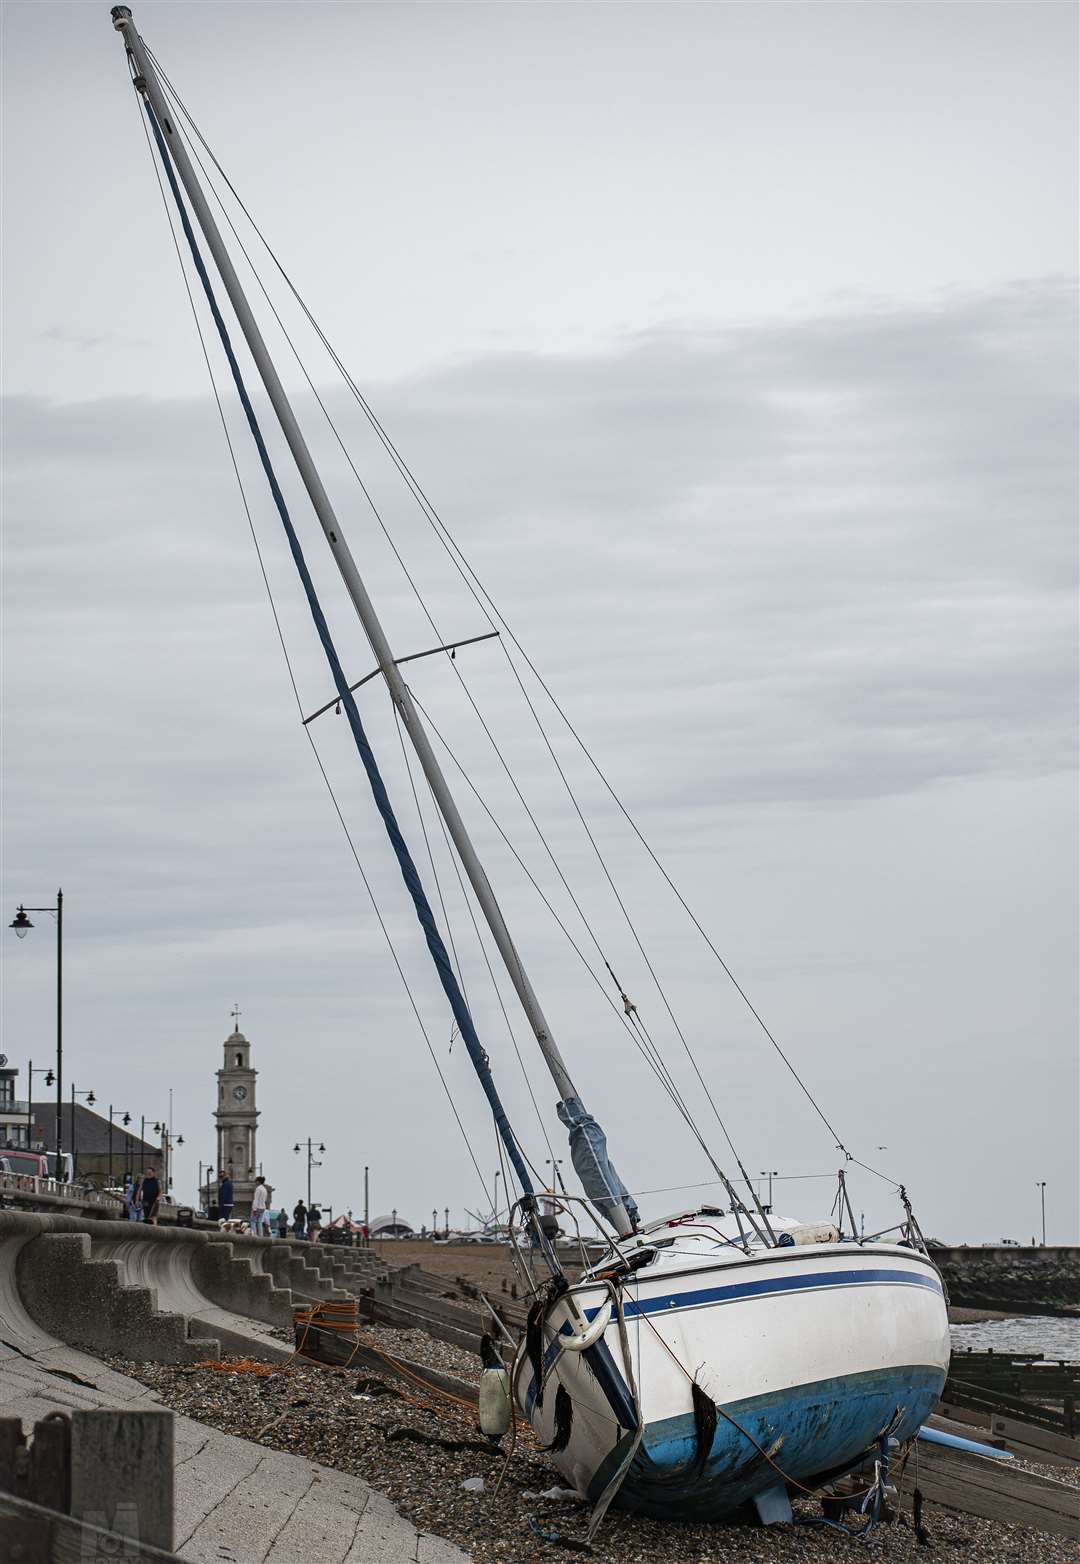 The sailing cruiser on Herne Bay beach. Photo: Omri Moxey/ MOXEYS PHOTOGRAPHY